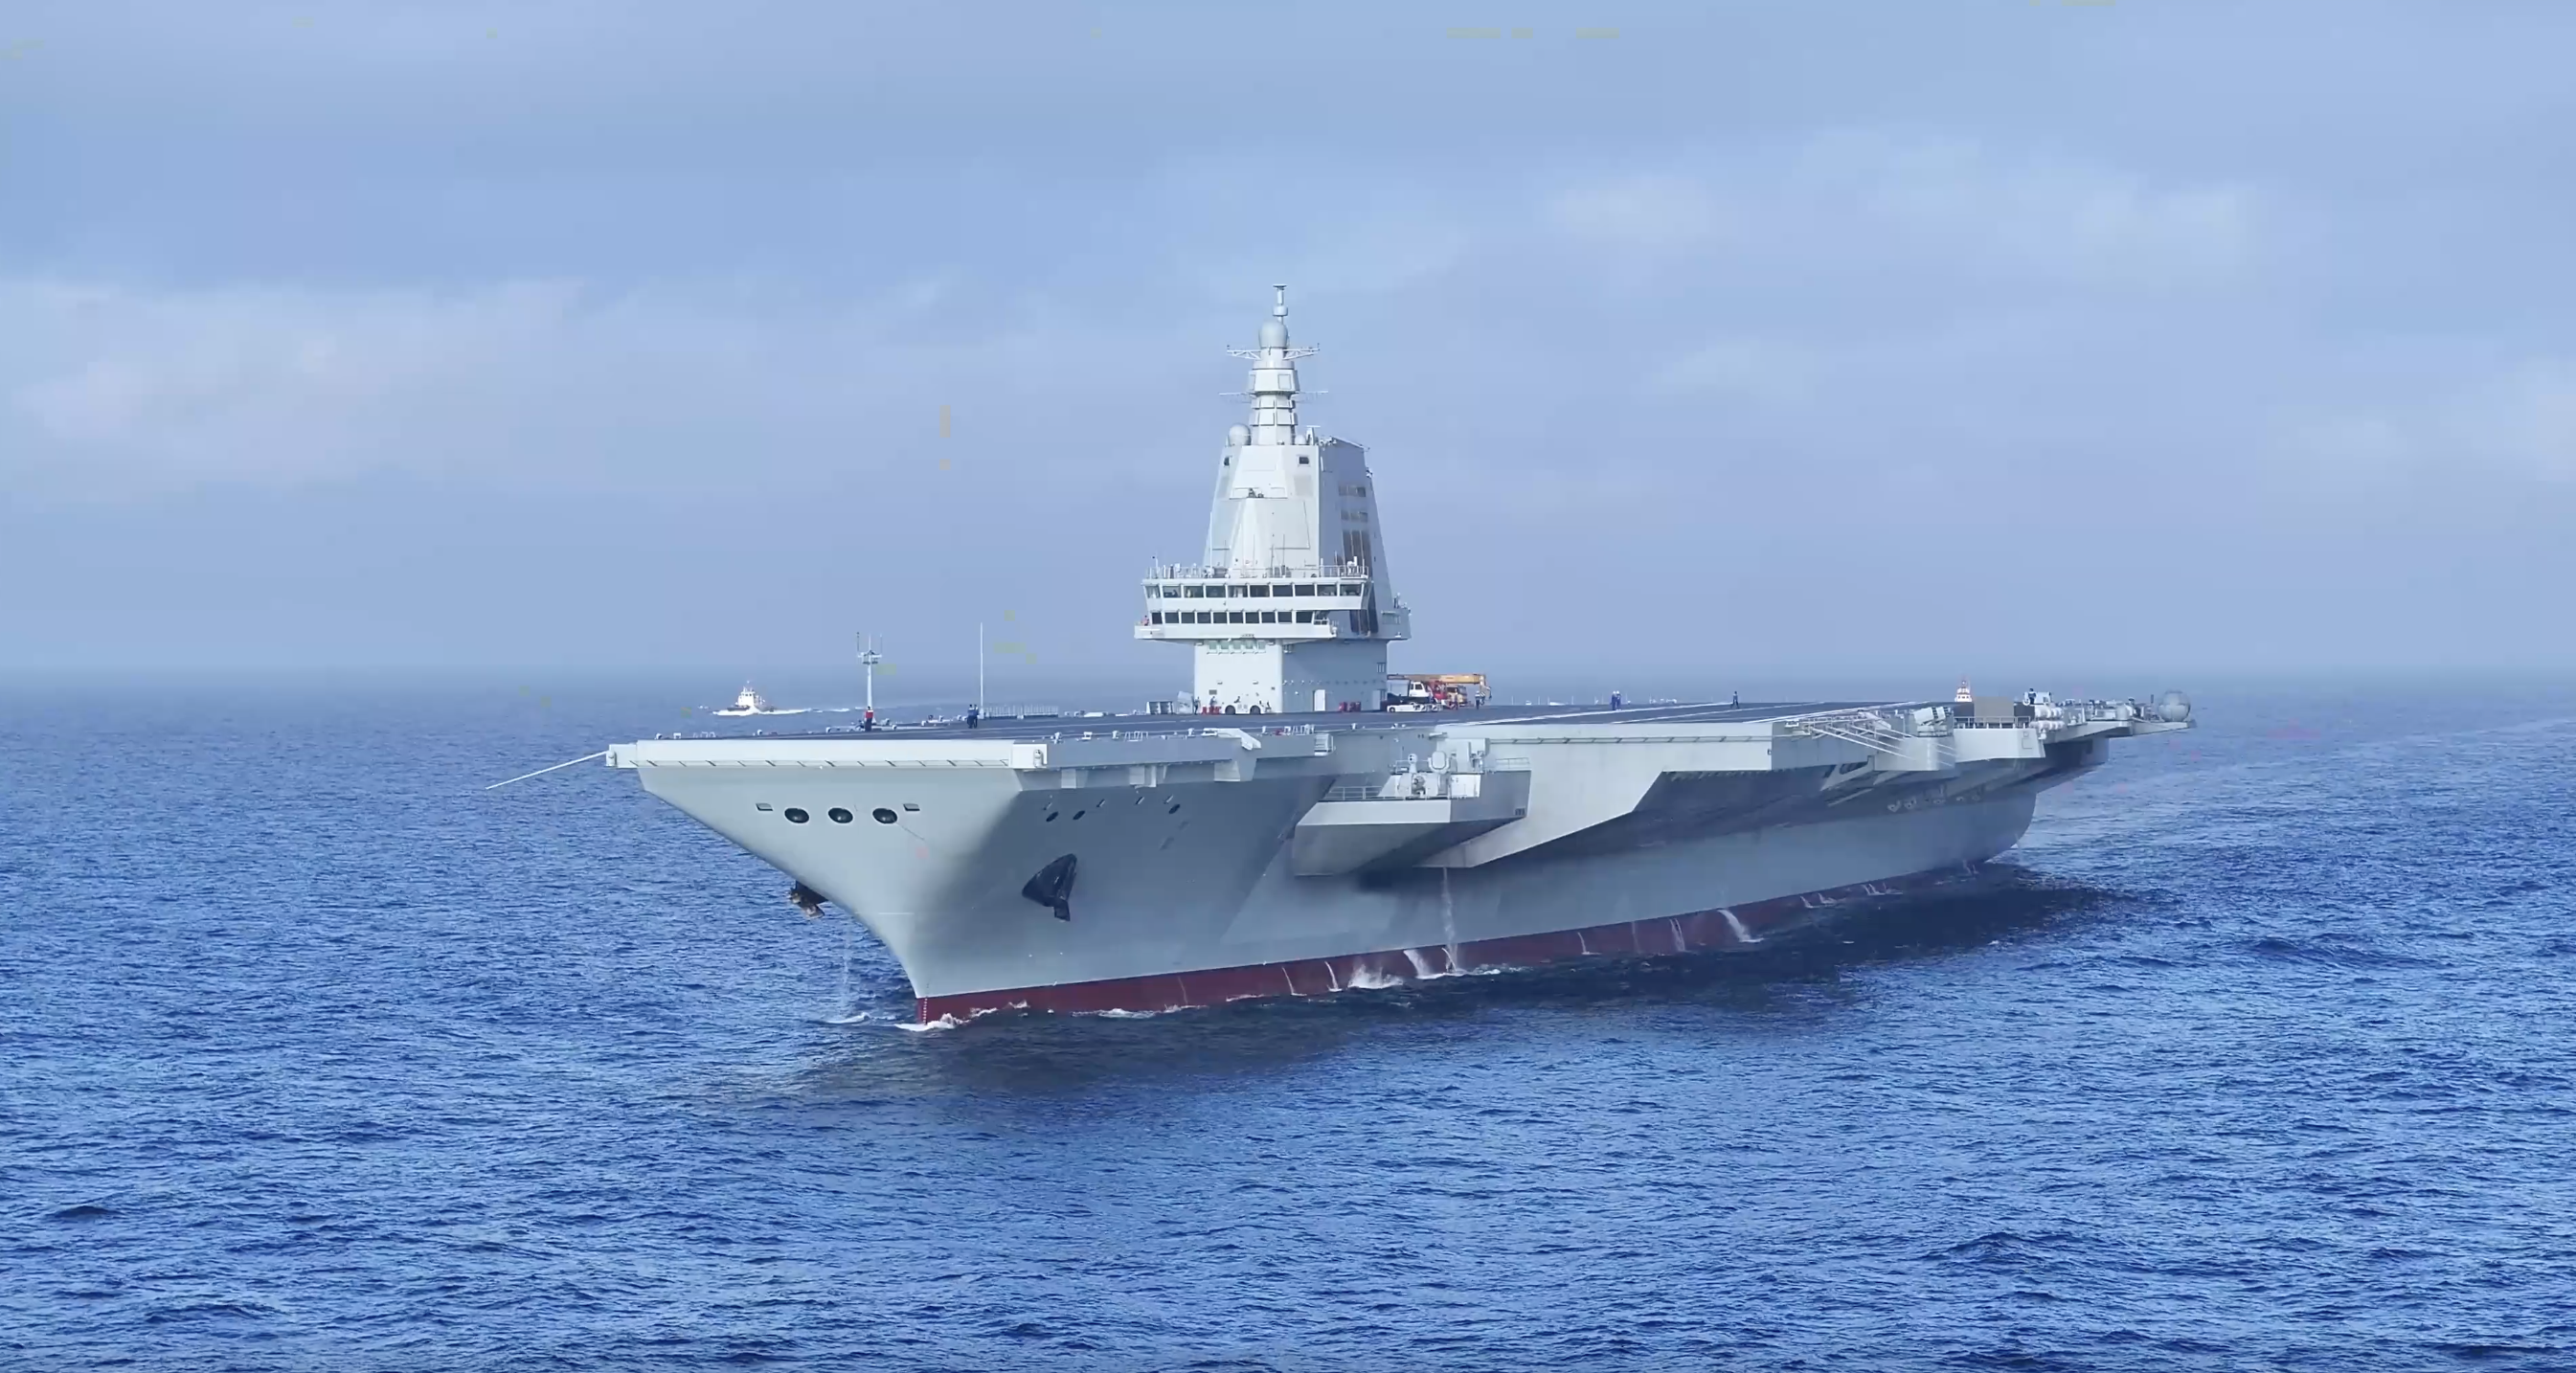 fujian vs. ford: can china's new aircraft carrier rival the u.s. navy?